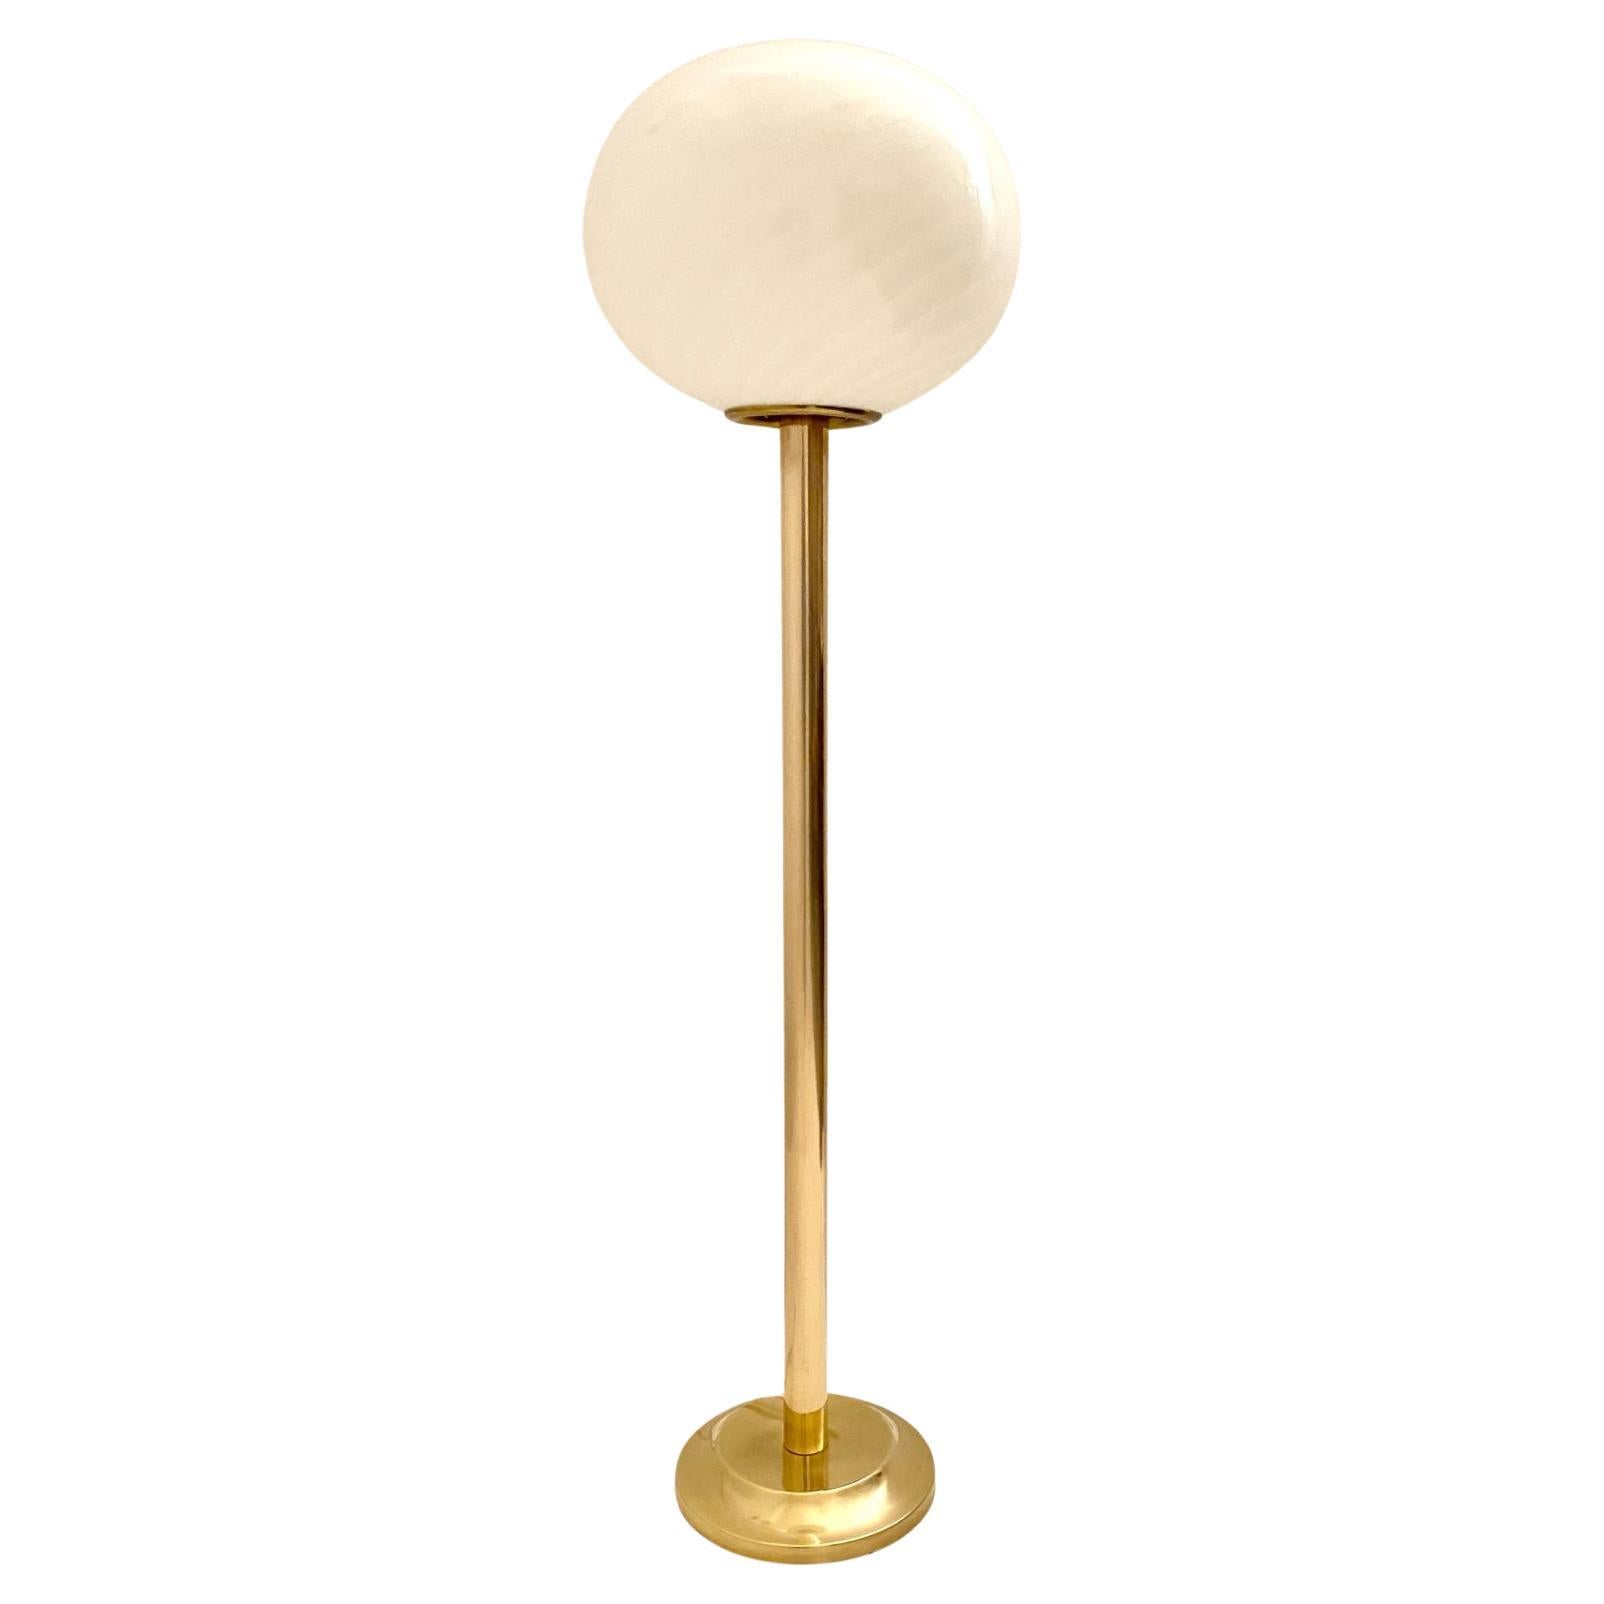 Midcentury Modern Brass and  Glass Floor Lamp, Italy 1960s For Sale